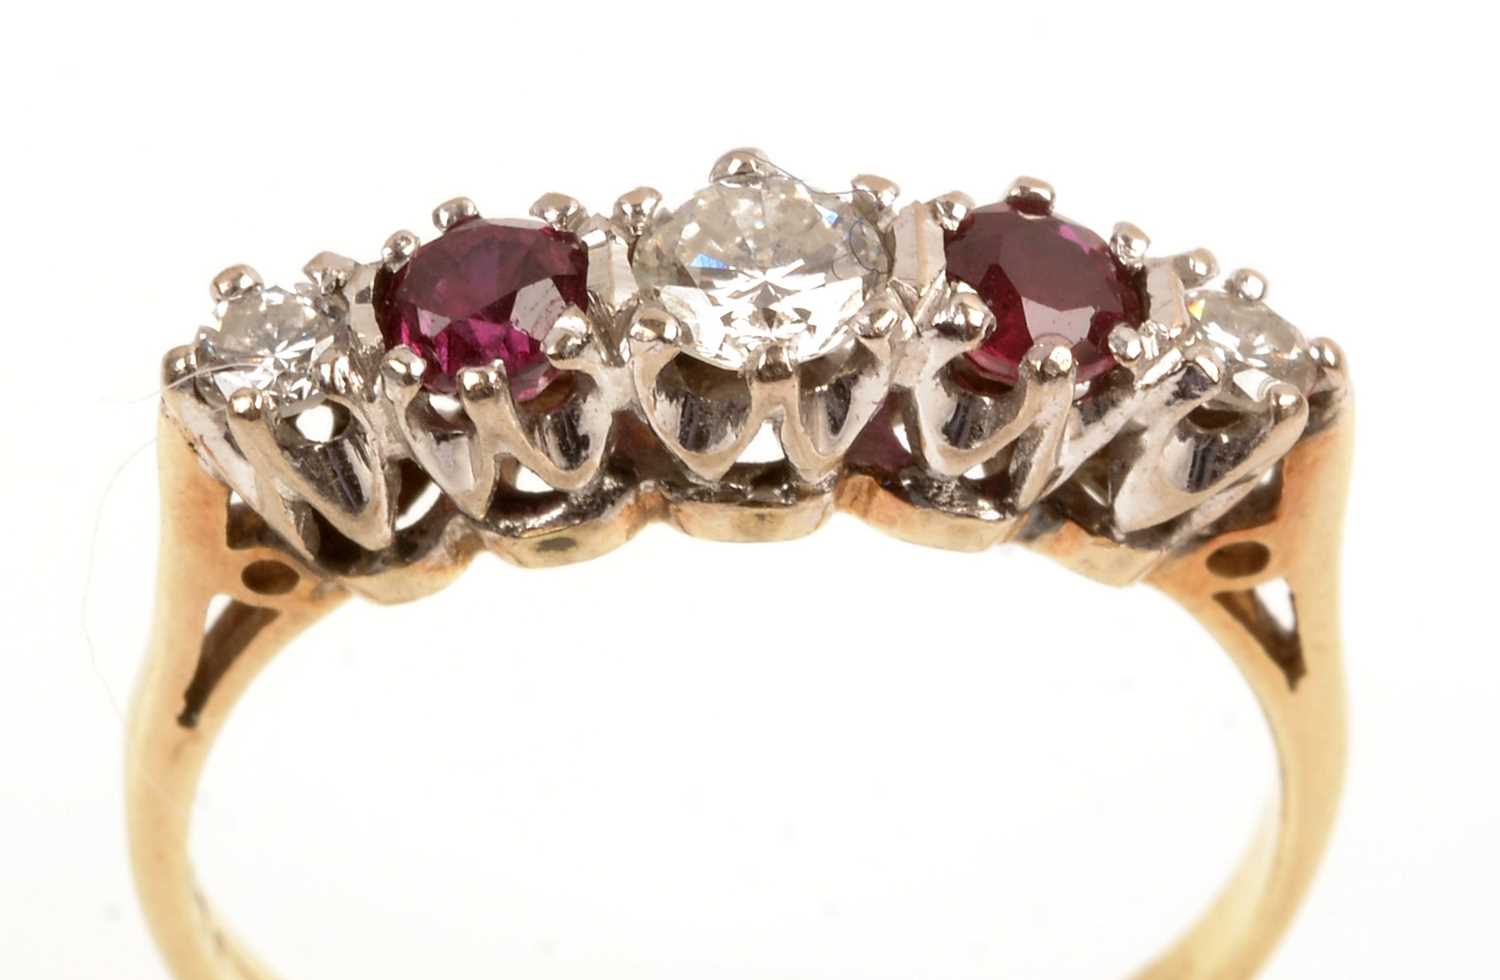 Lot 133 - Ruby and diamond ring